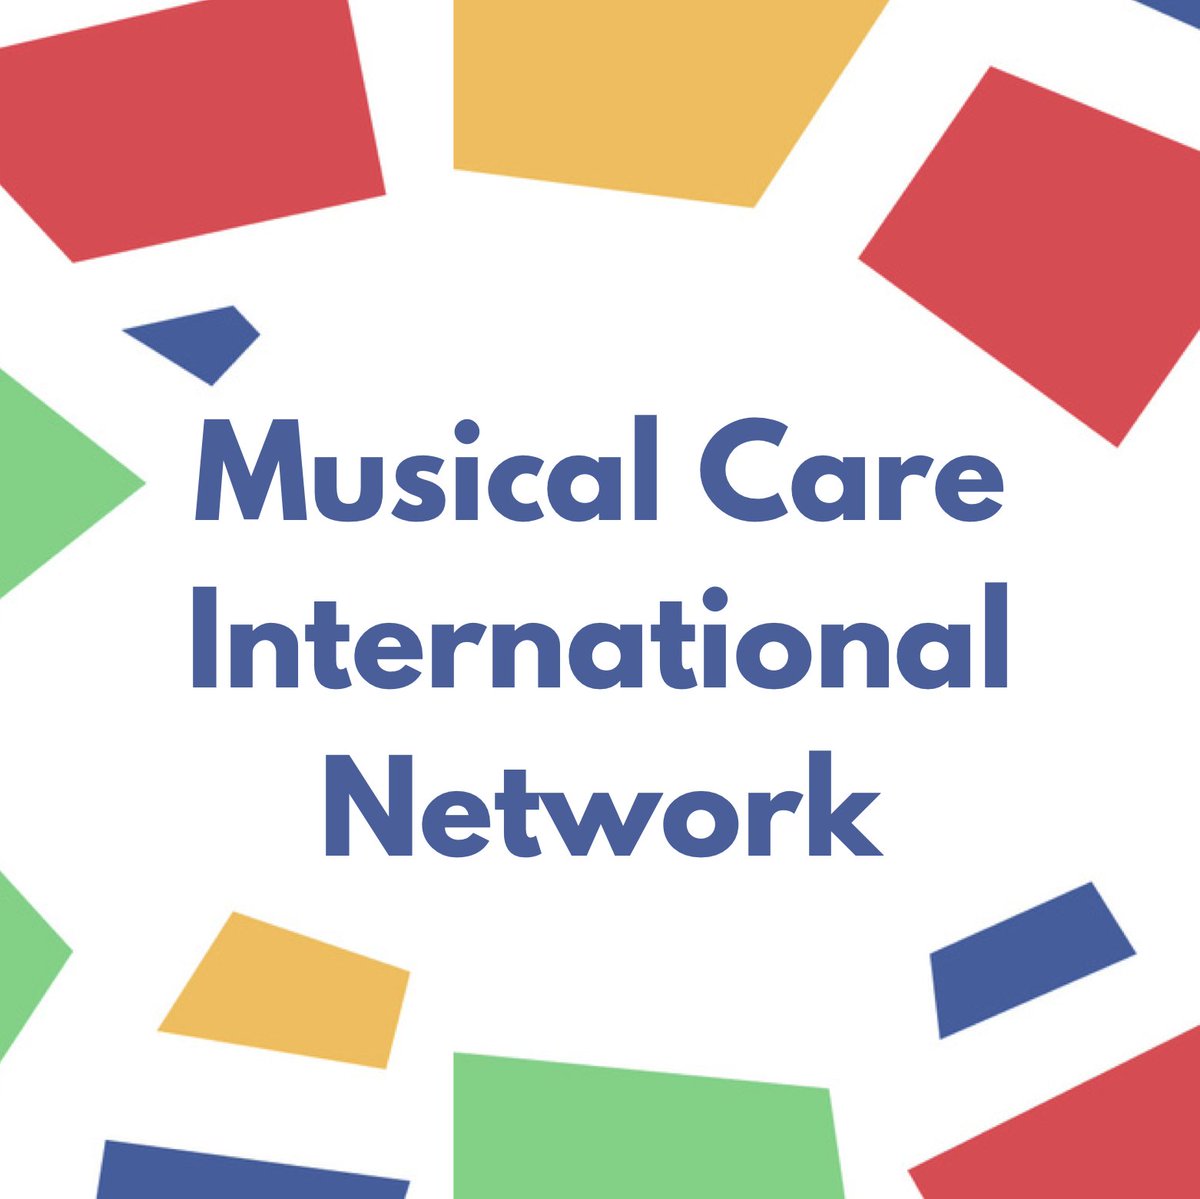 The Musical Care International Network was set up at the RCM @CPerfSci to explore musical care from different perspectives. Find out more about their mission in their first paper published in Music & Science today, written by 34 authors from 18 countries: bit.ly/3Fqrmtq